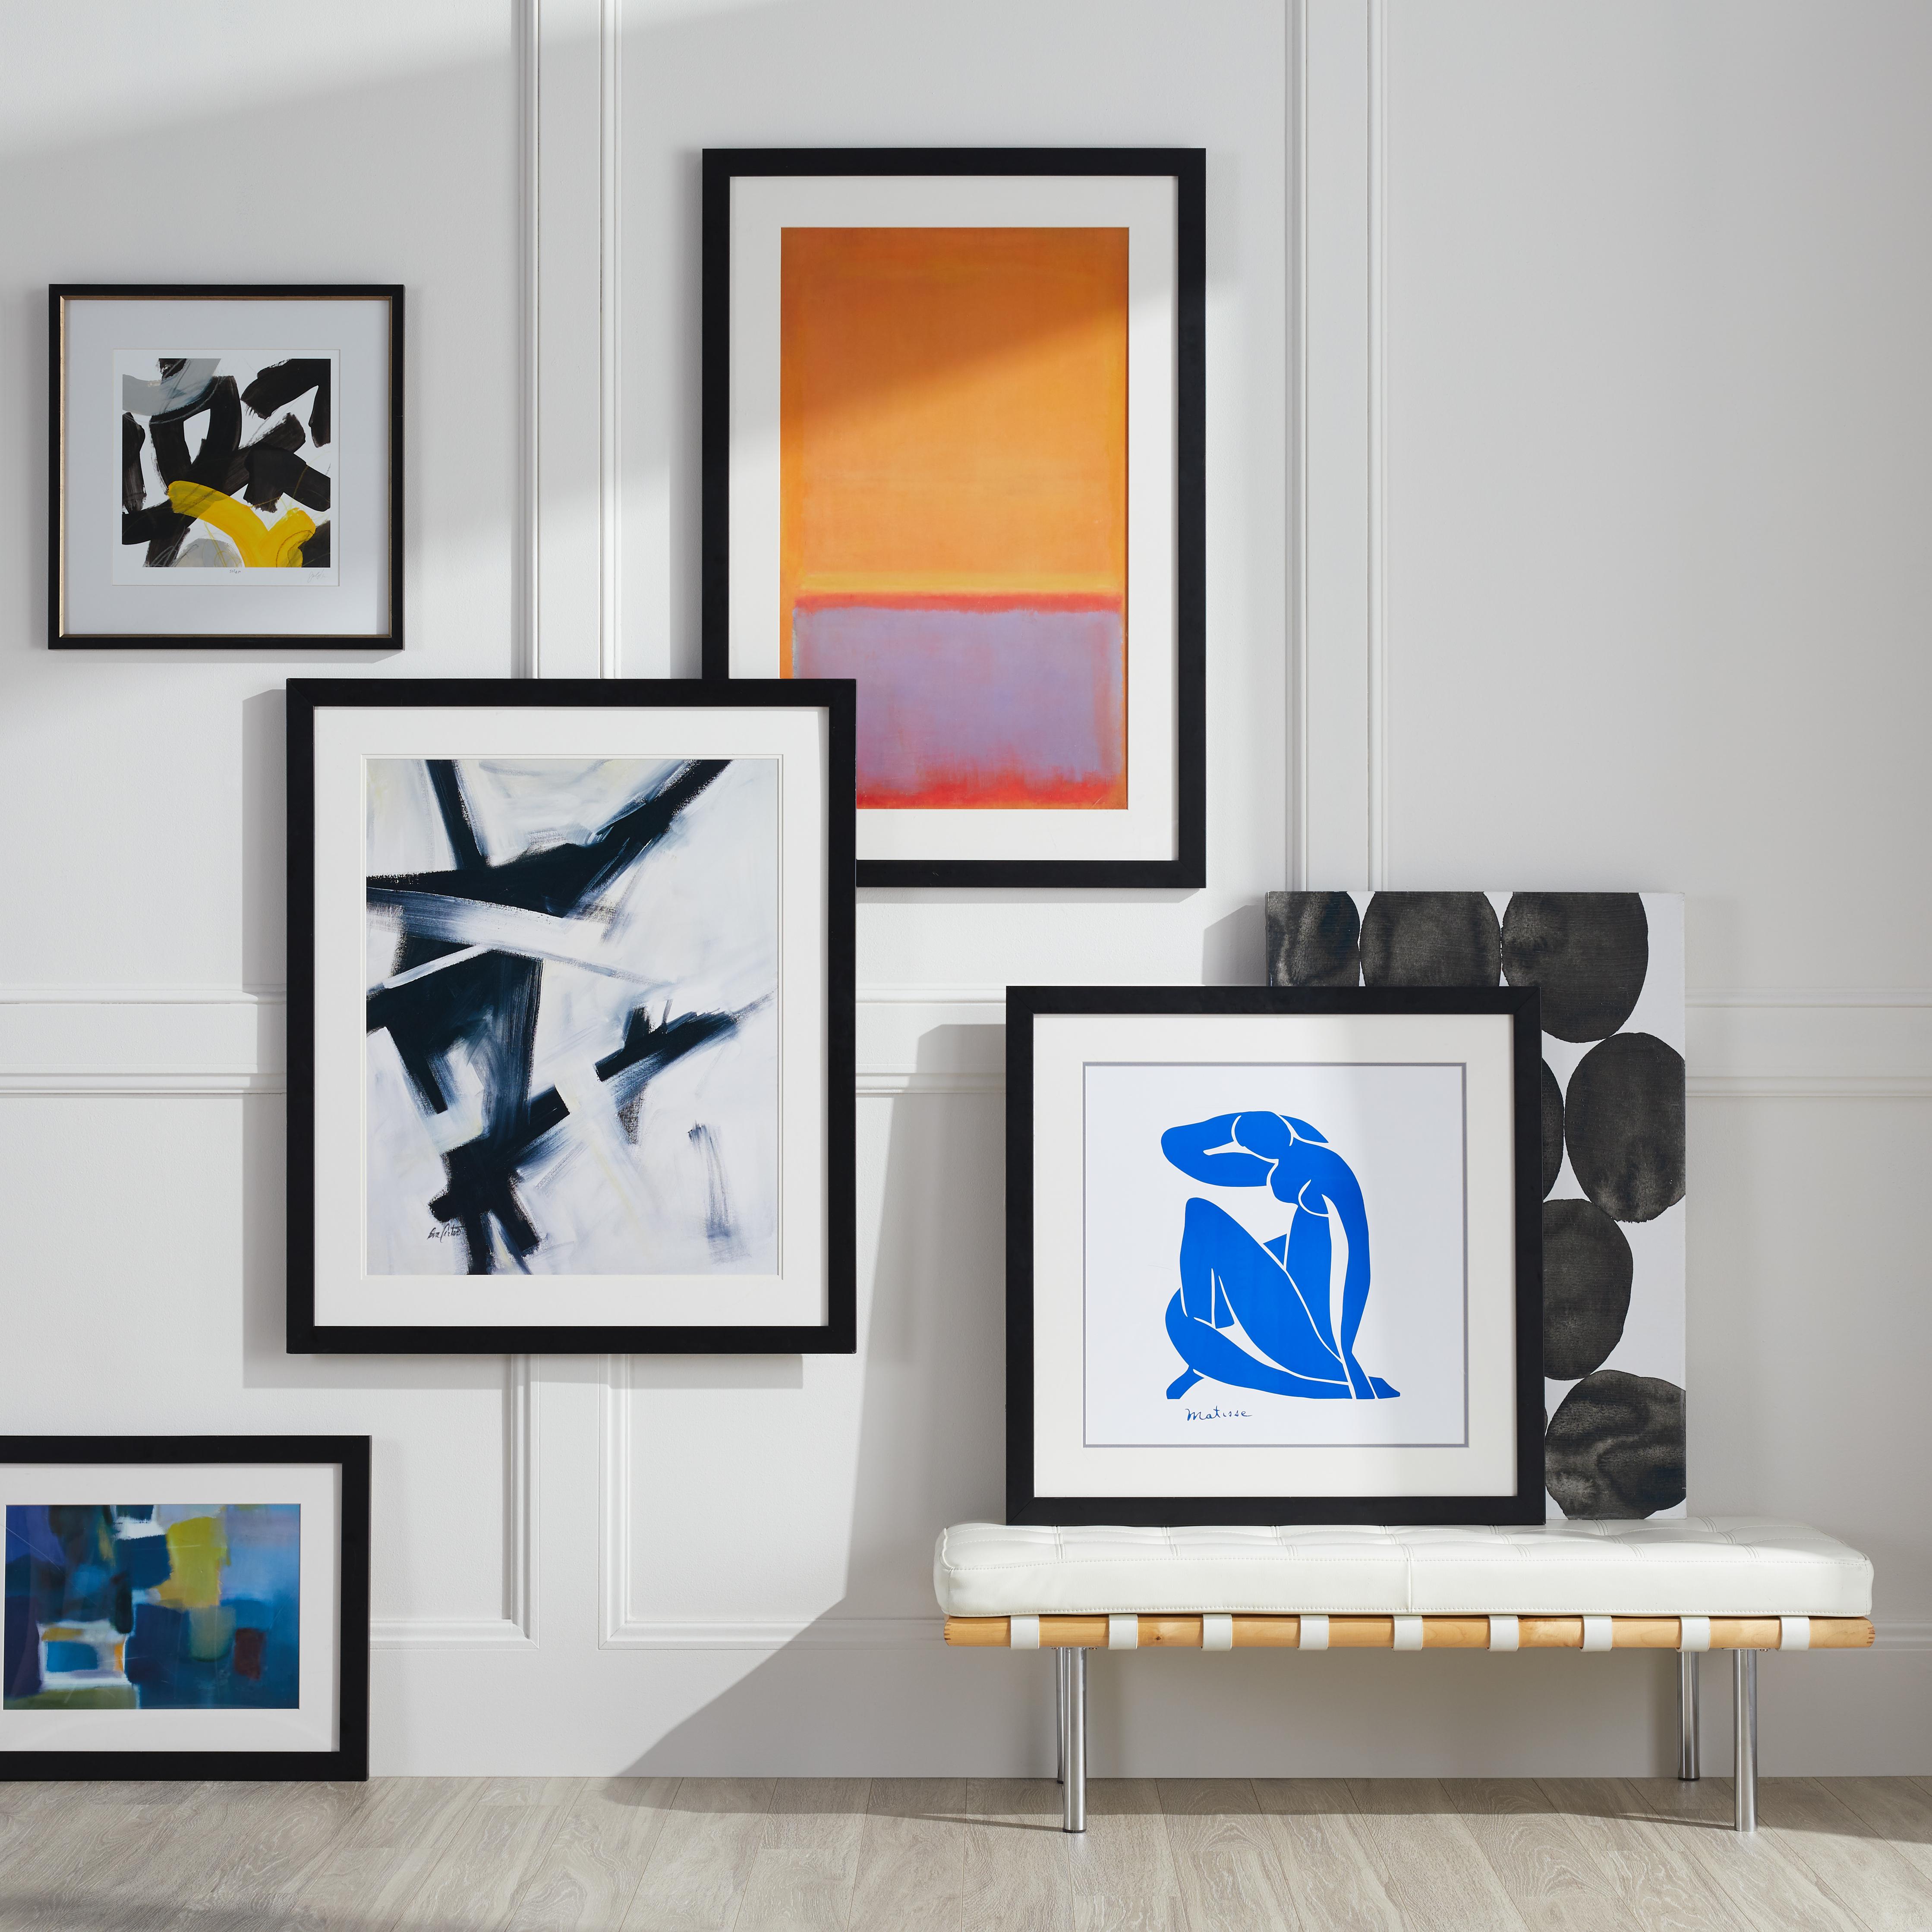 save an extra 10% on Select Art Gallery*